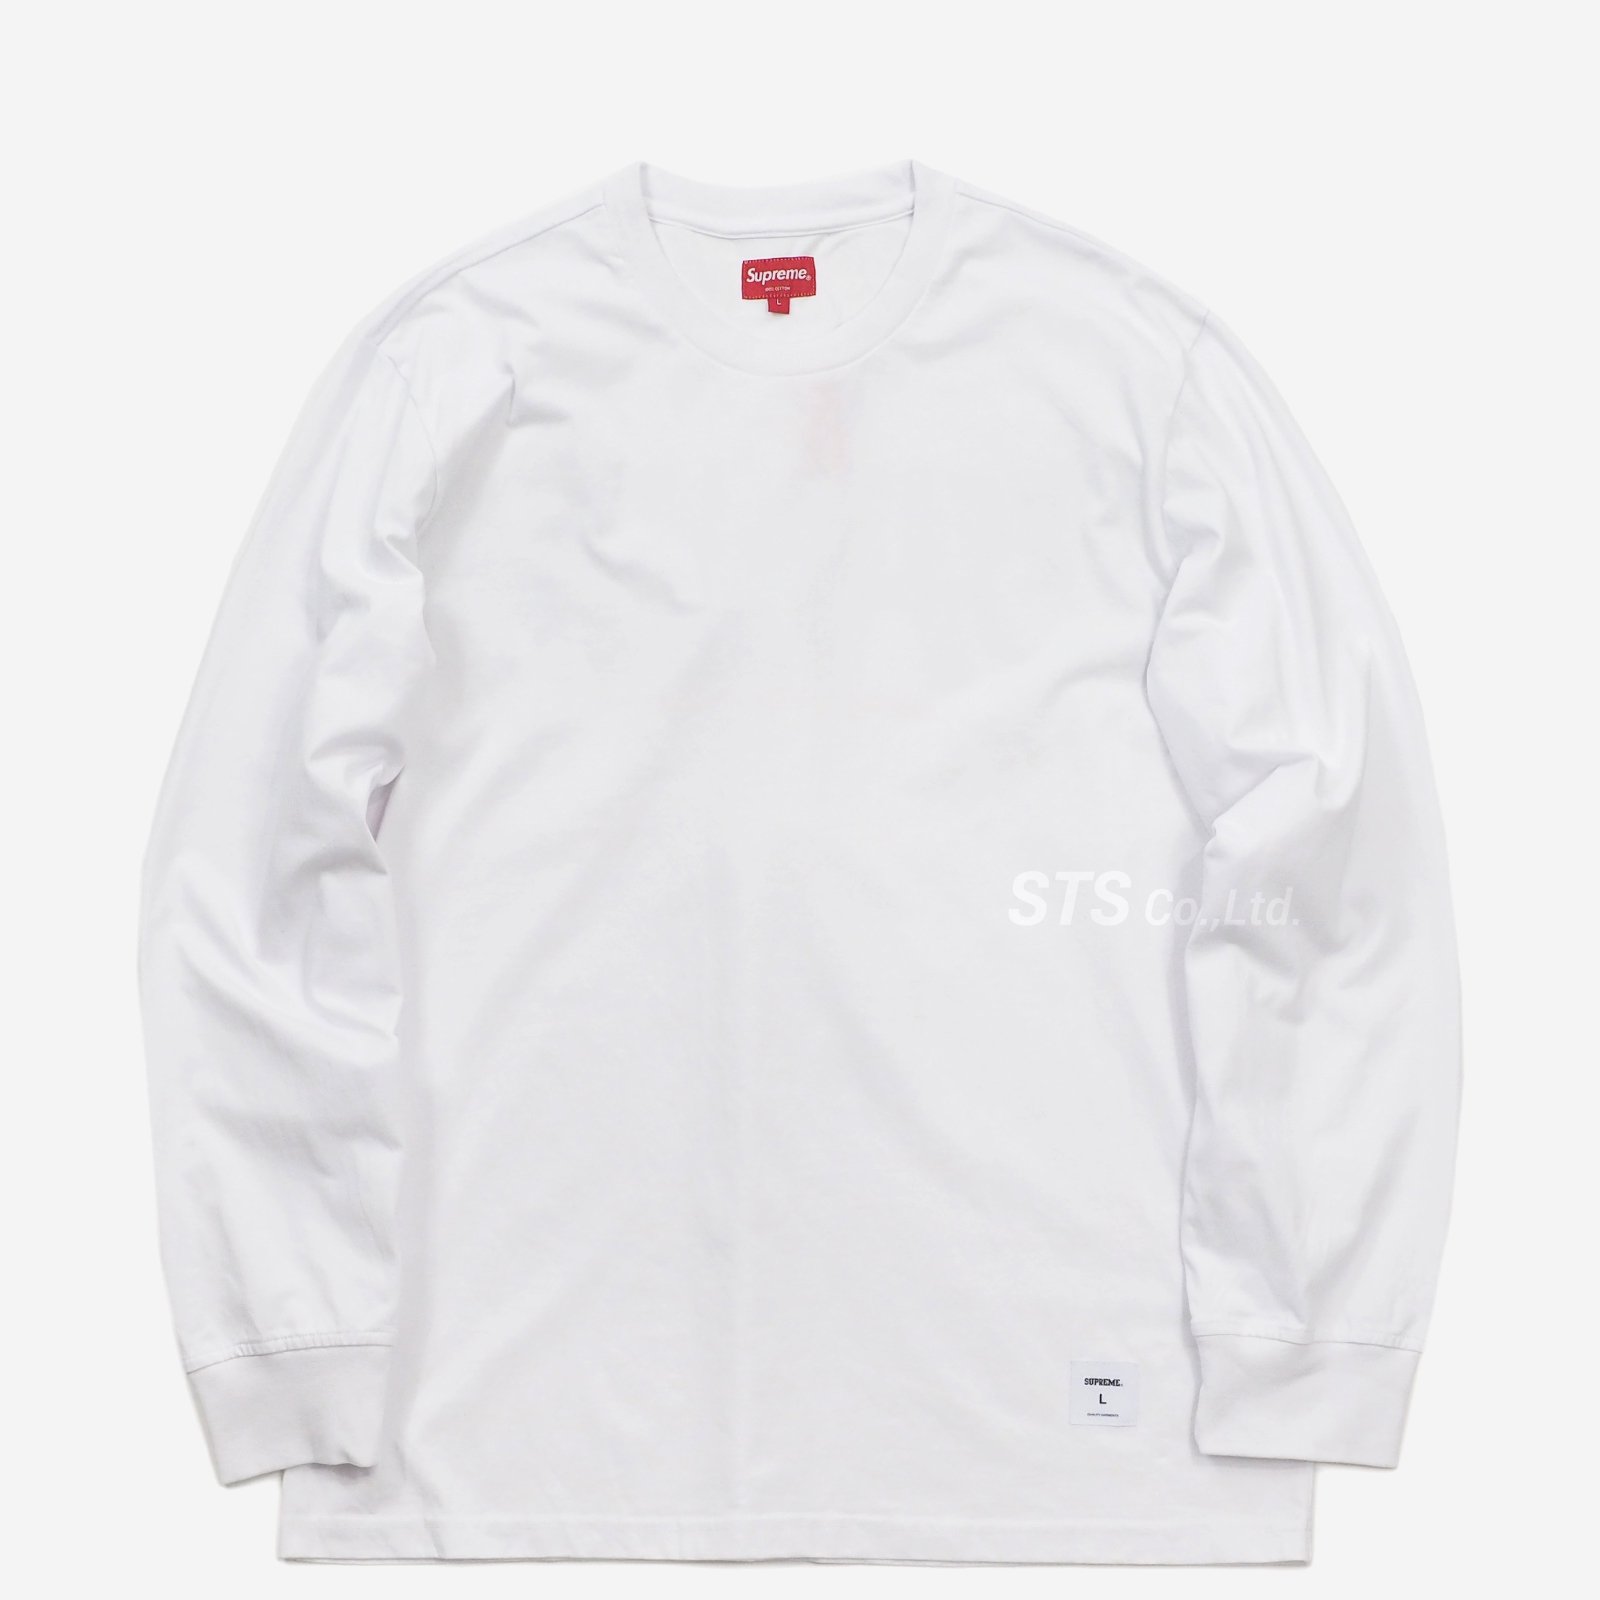 SUPREME Trademark L/S Top 19AW バックロゴ 白